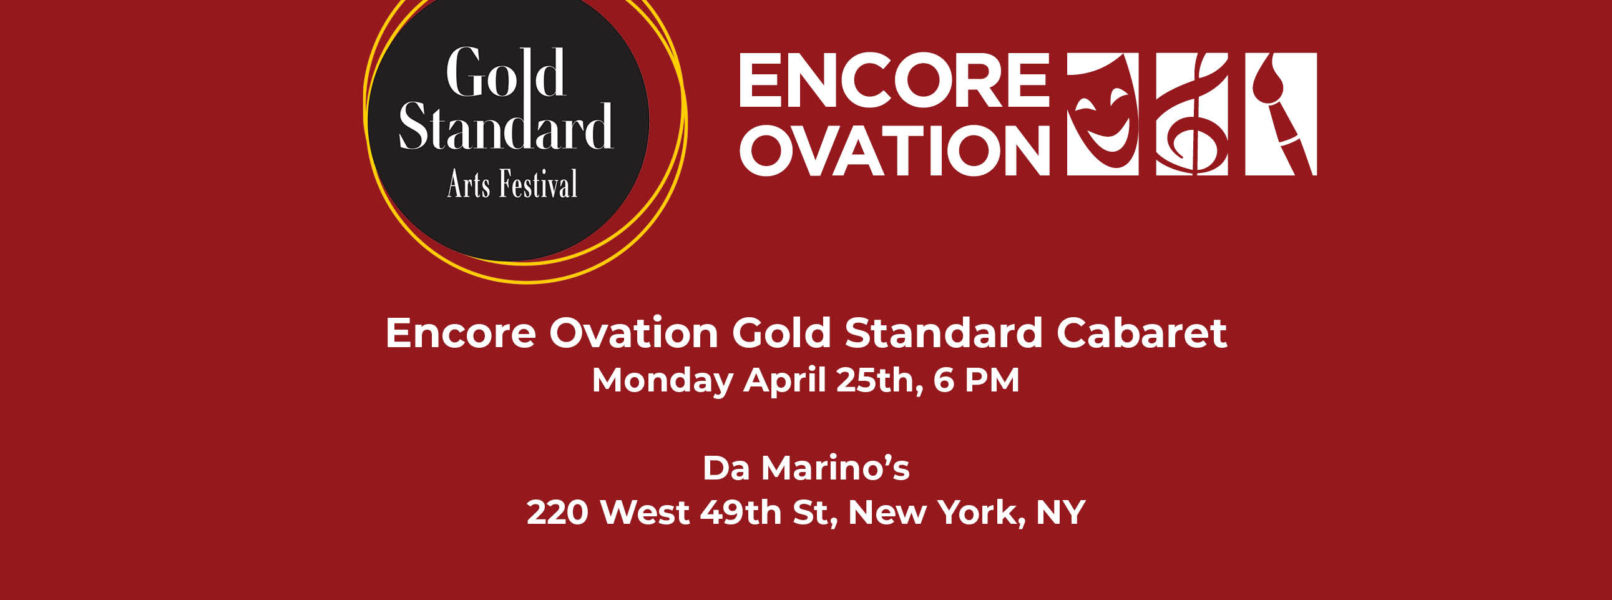 red background with black circle with words saying Gold Standard Arts Festival, encore ovation gold standard cabaret.